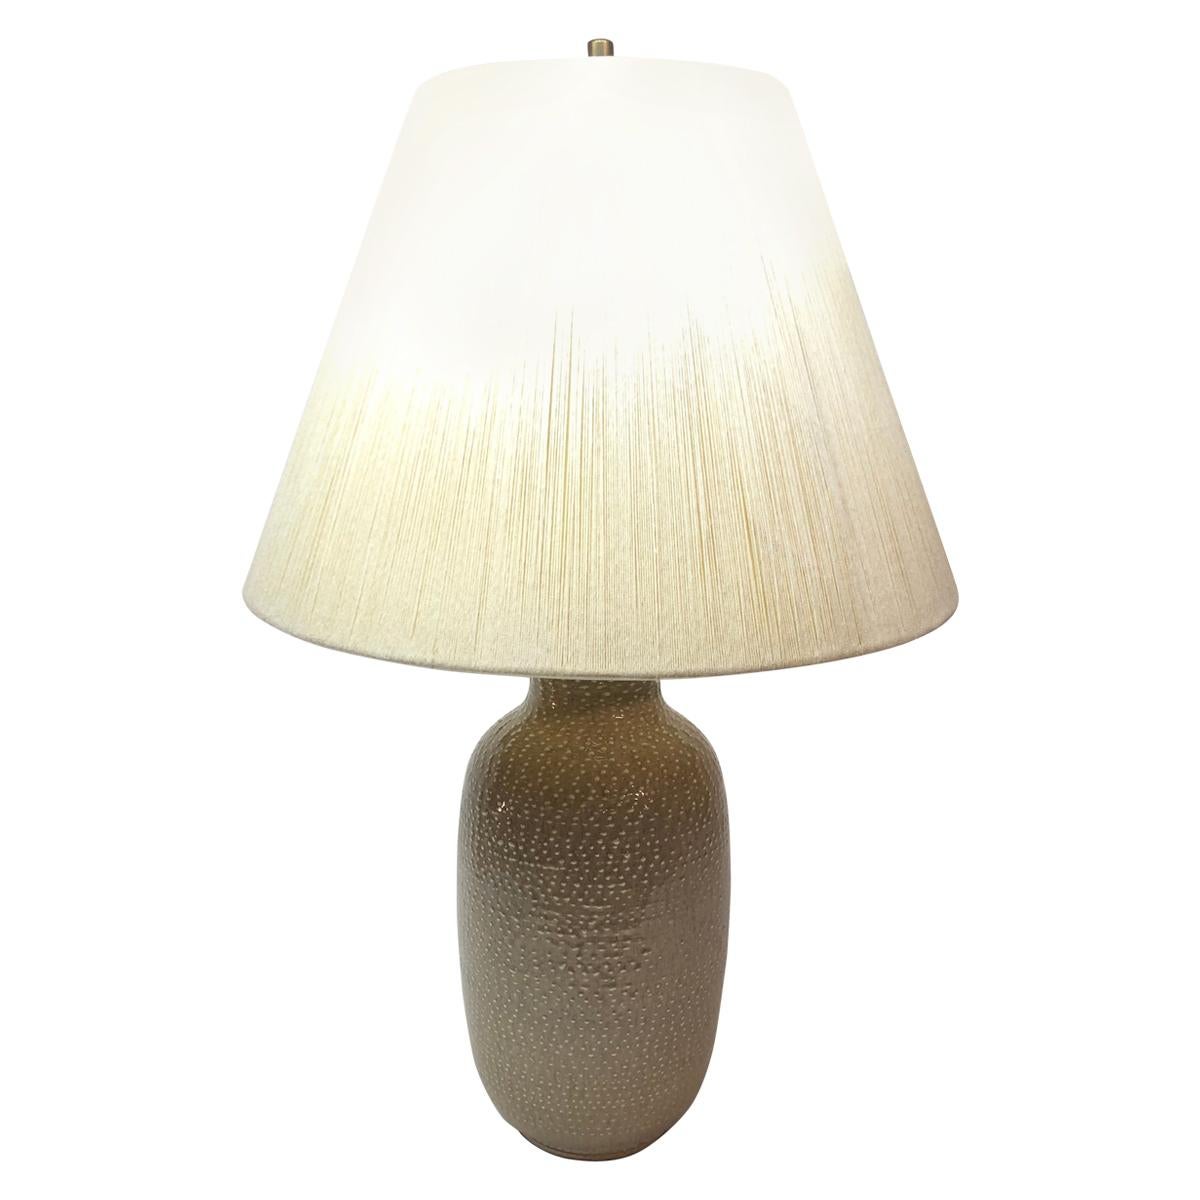 Can ceramic table lamps be painted?